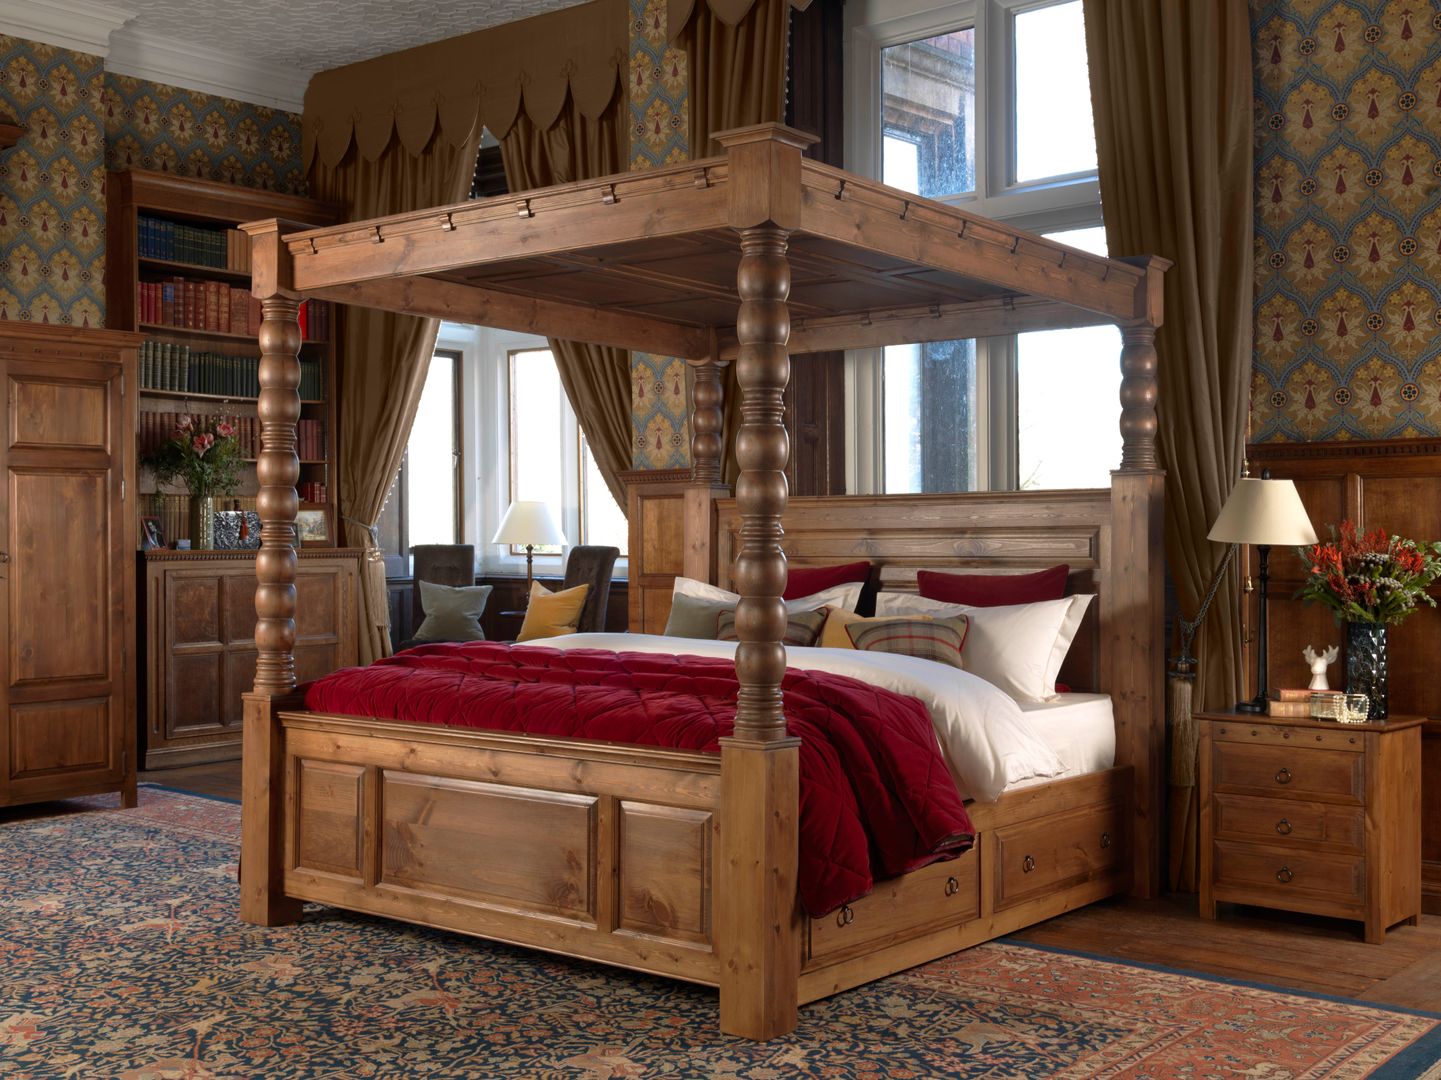 The Ambassador Four Poster Bed Revival Beds Classic style bedroom Beds & headboards